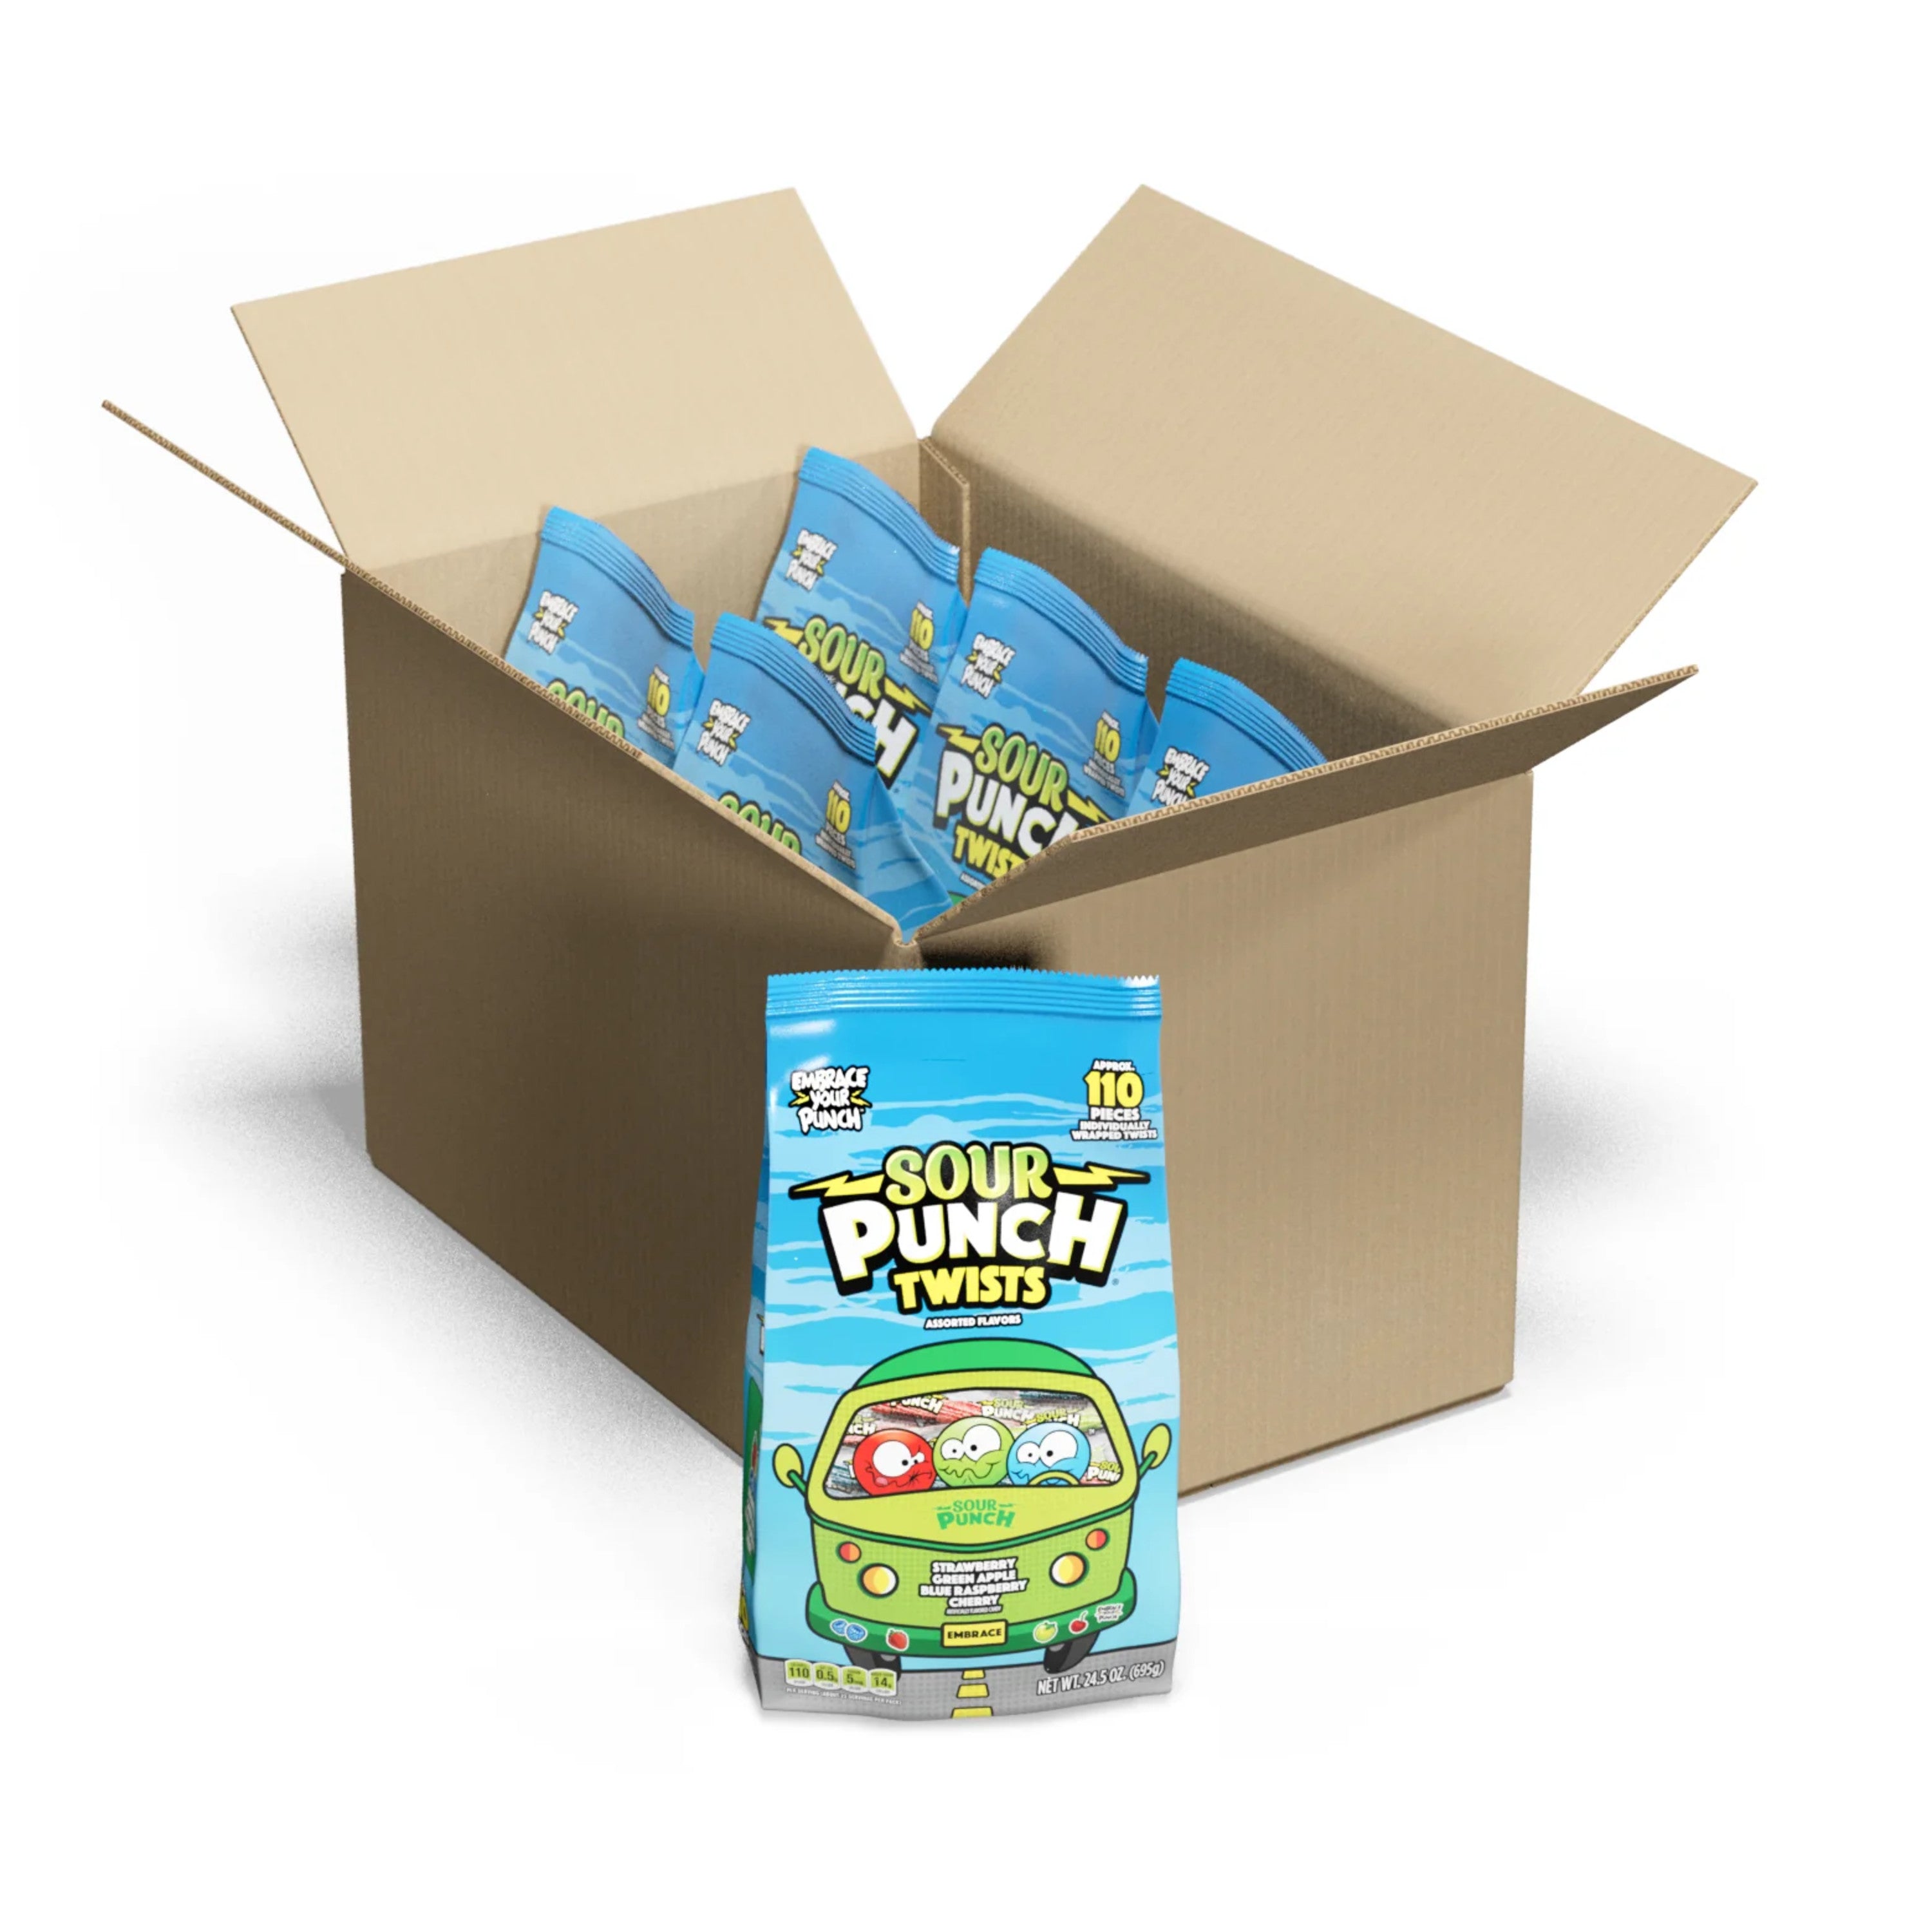 SOUR PUNCH Individually Wrapped Candy Twists (6-Pack)